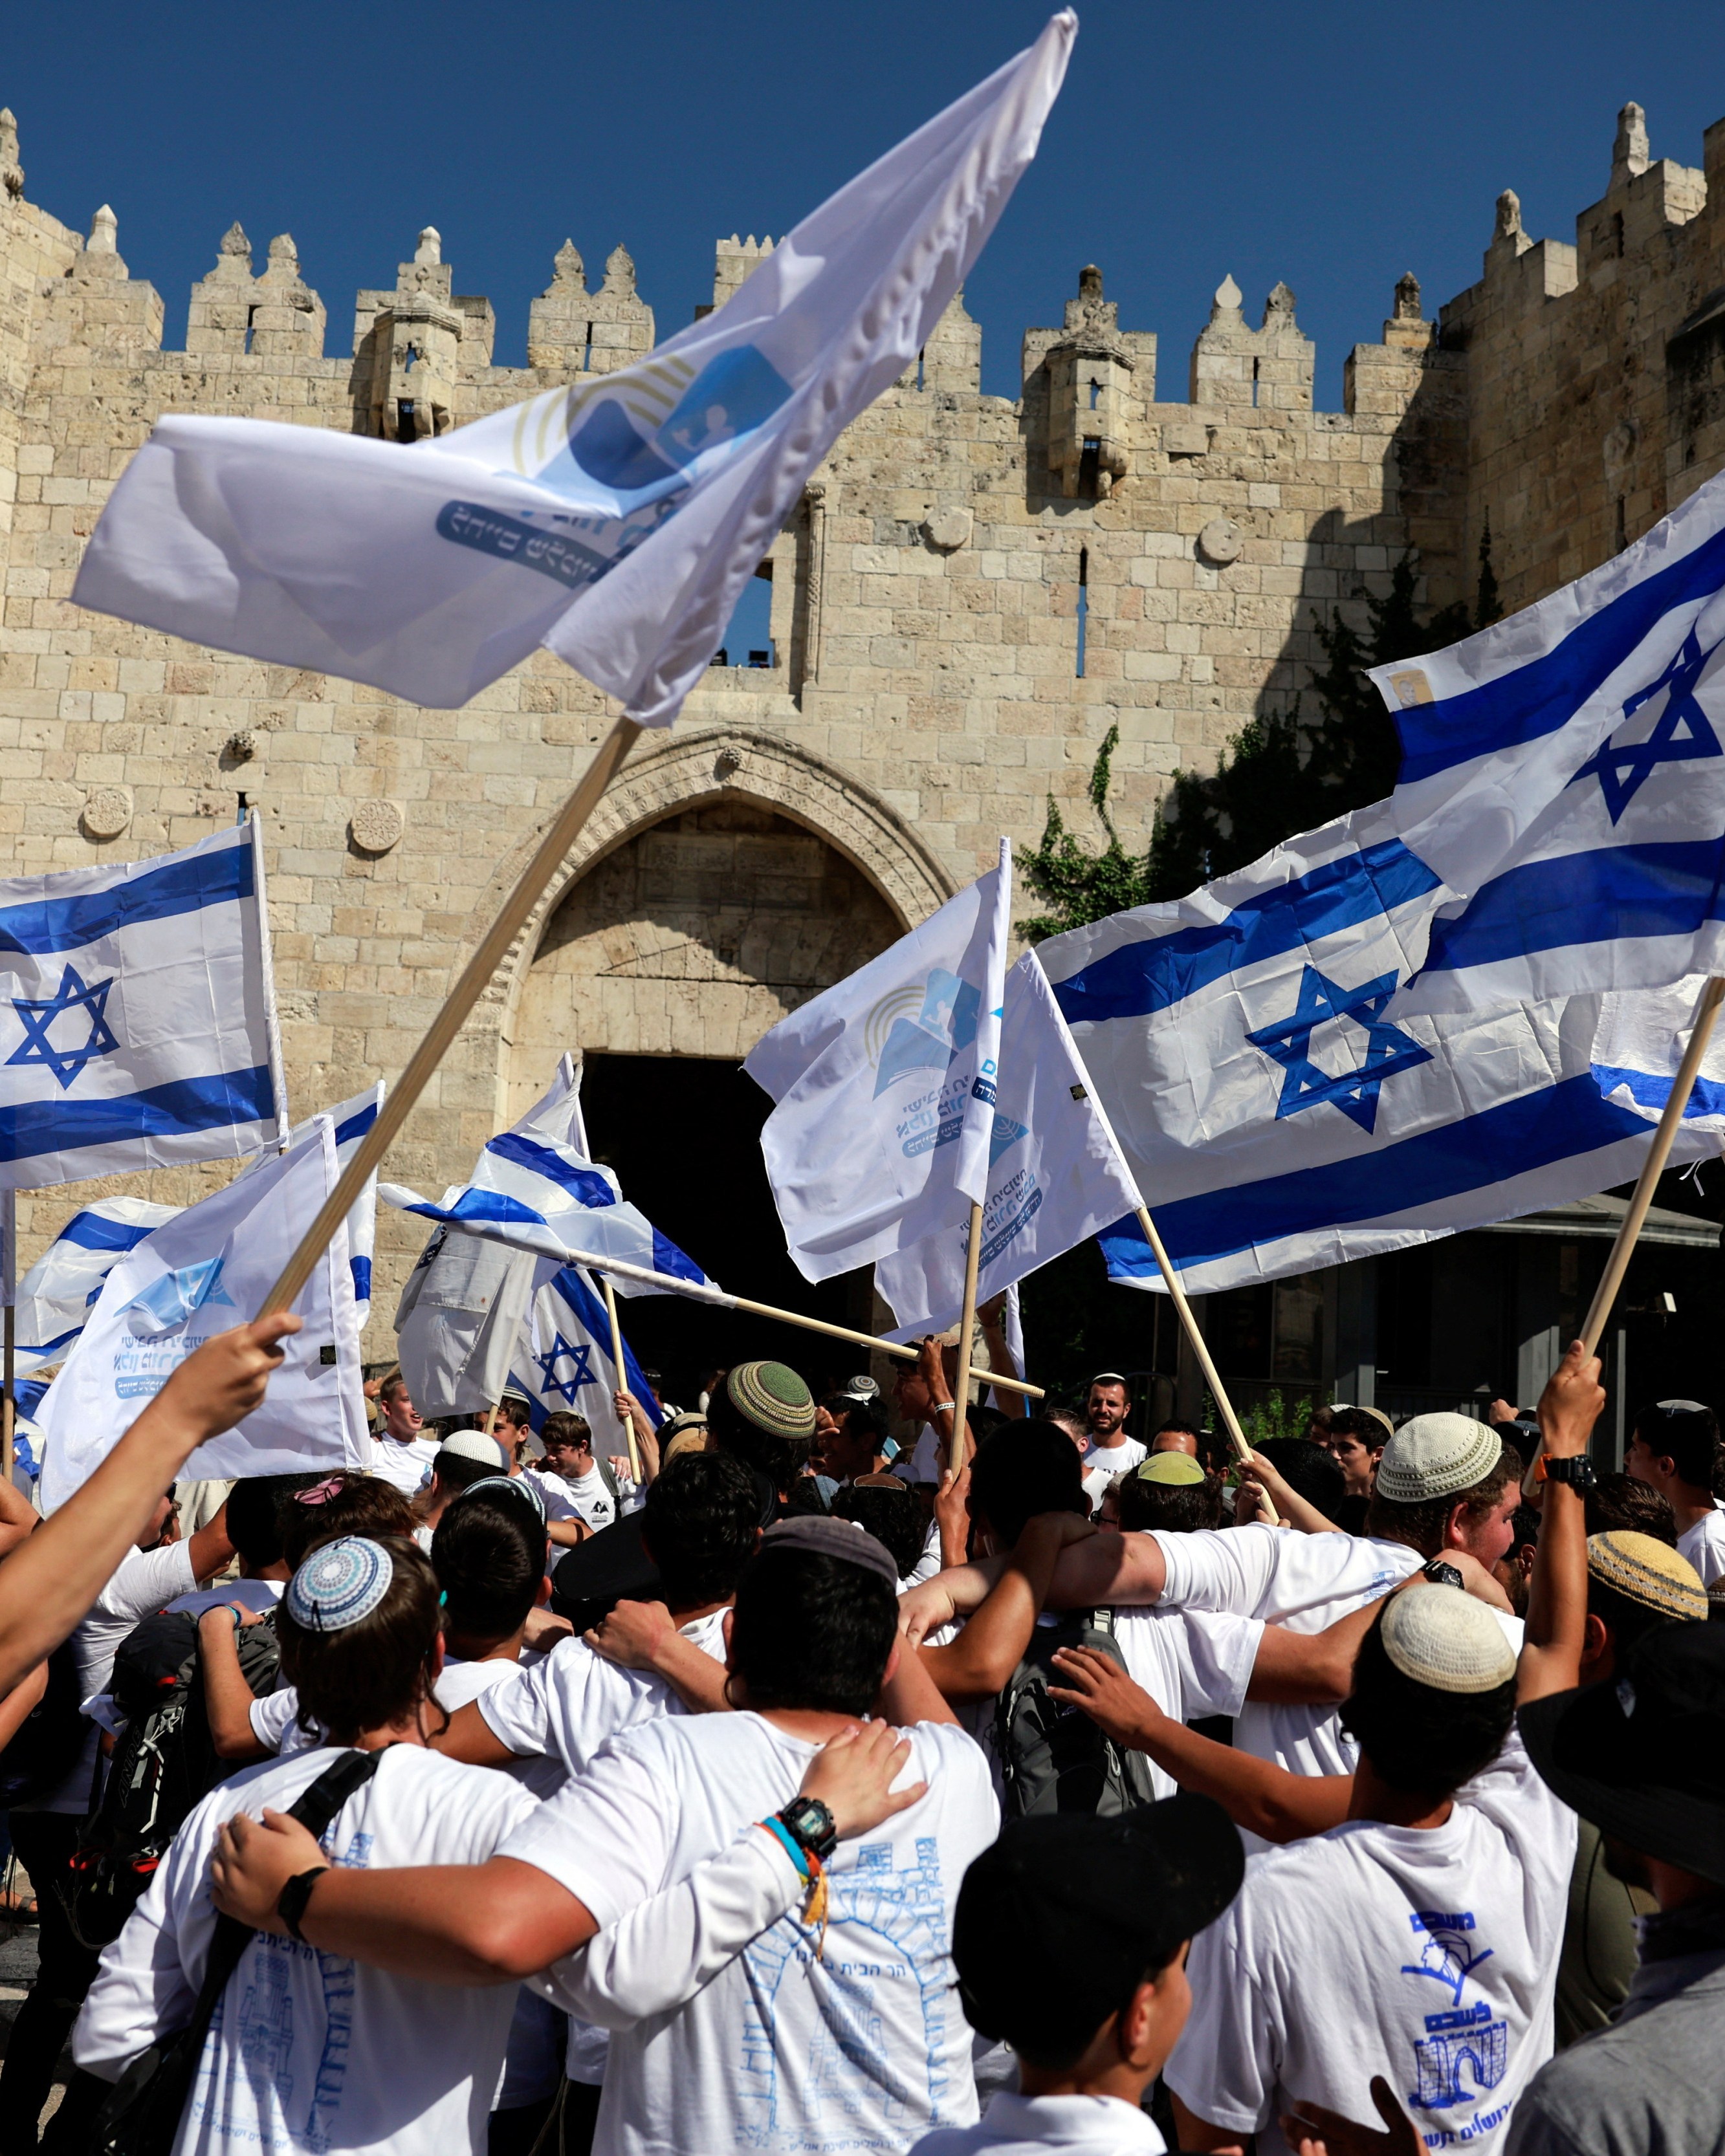 Thousands of Israeli nationalists march into the Muslim quarter of Old City